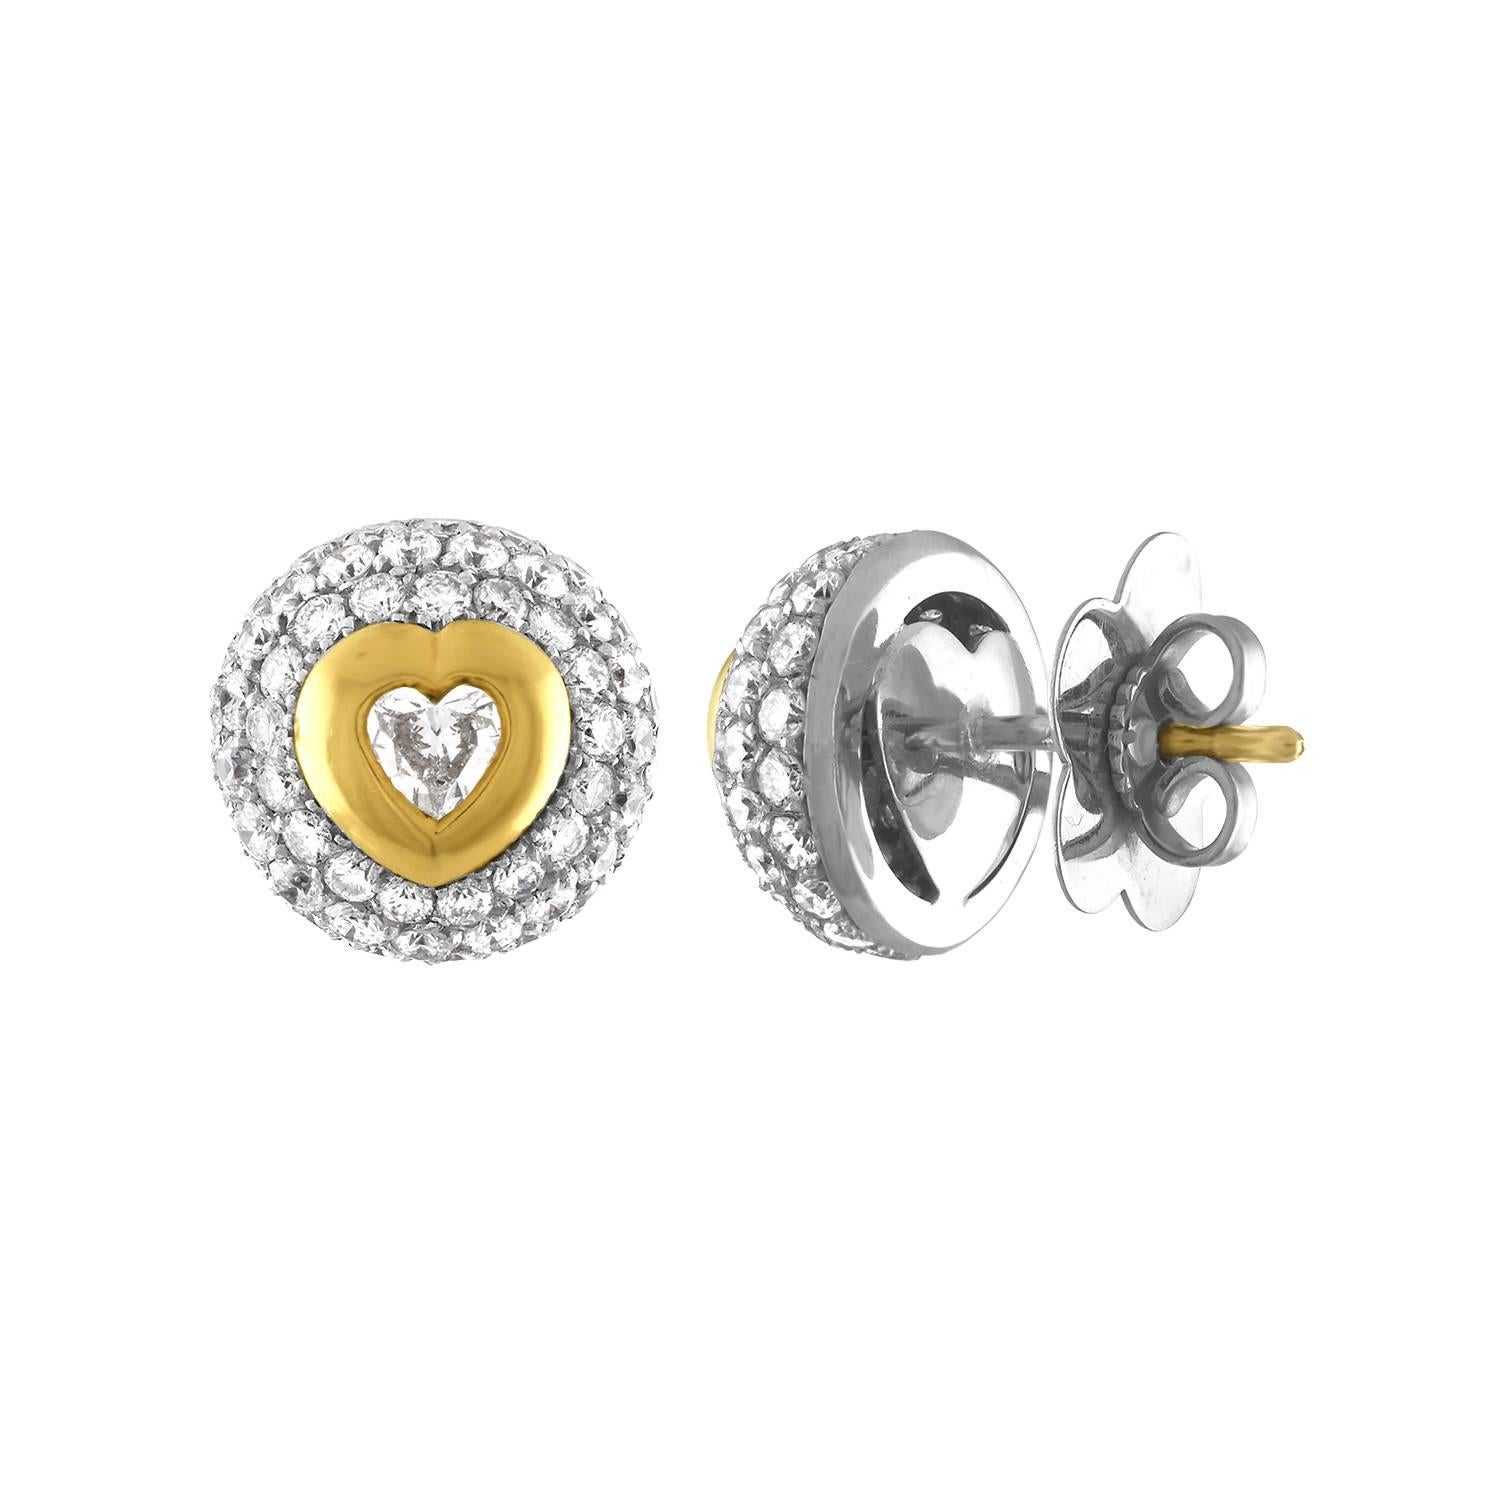 Very Beautiful Button With Center Heart Stud Earrings
The earrings are 18K White And Yellow Gold
There are 3.50 Carats in Diamonds F/G VS
The earrings are by Pasquale Bruni Made in Italy
The makers mark 2211 AL and 750 is on the posts of the